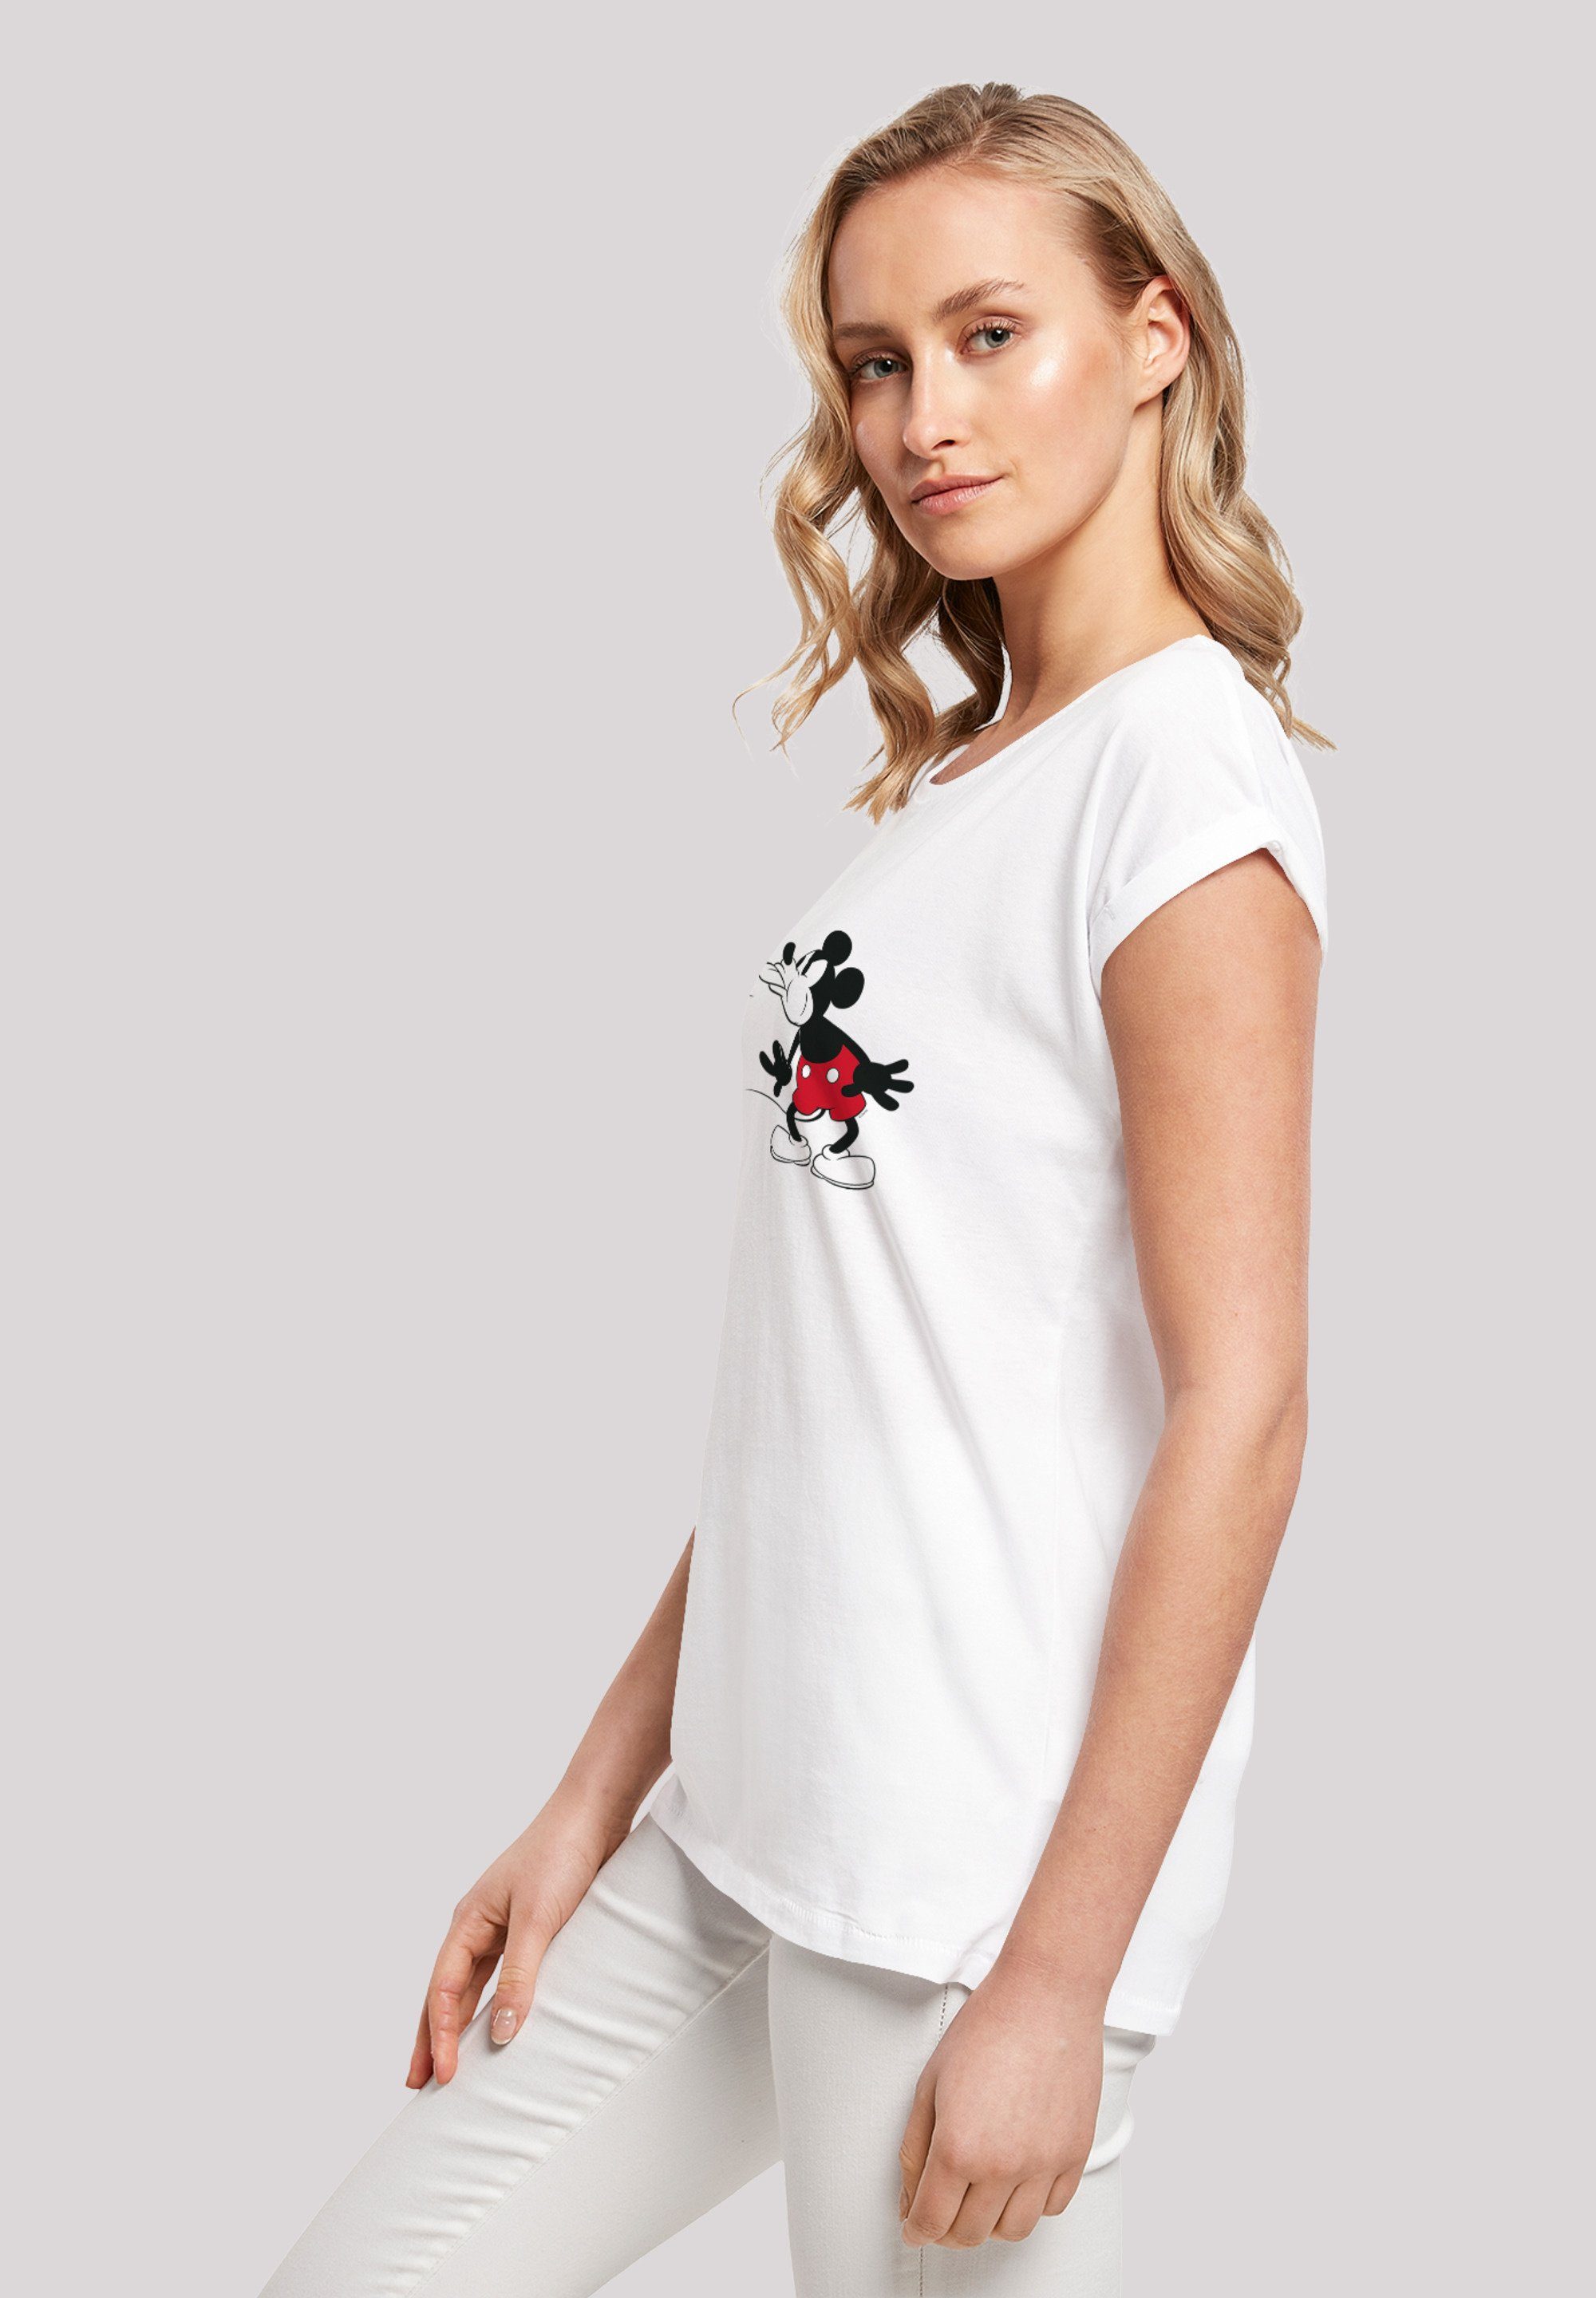 Mouse Maus Micky F4NT4STIC Disney Classic T-Shirt Print Vintage Mickey